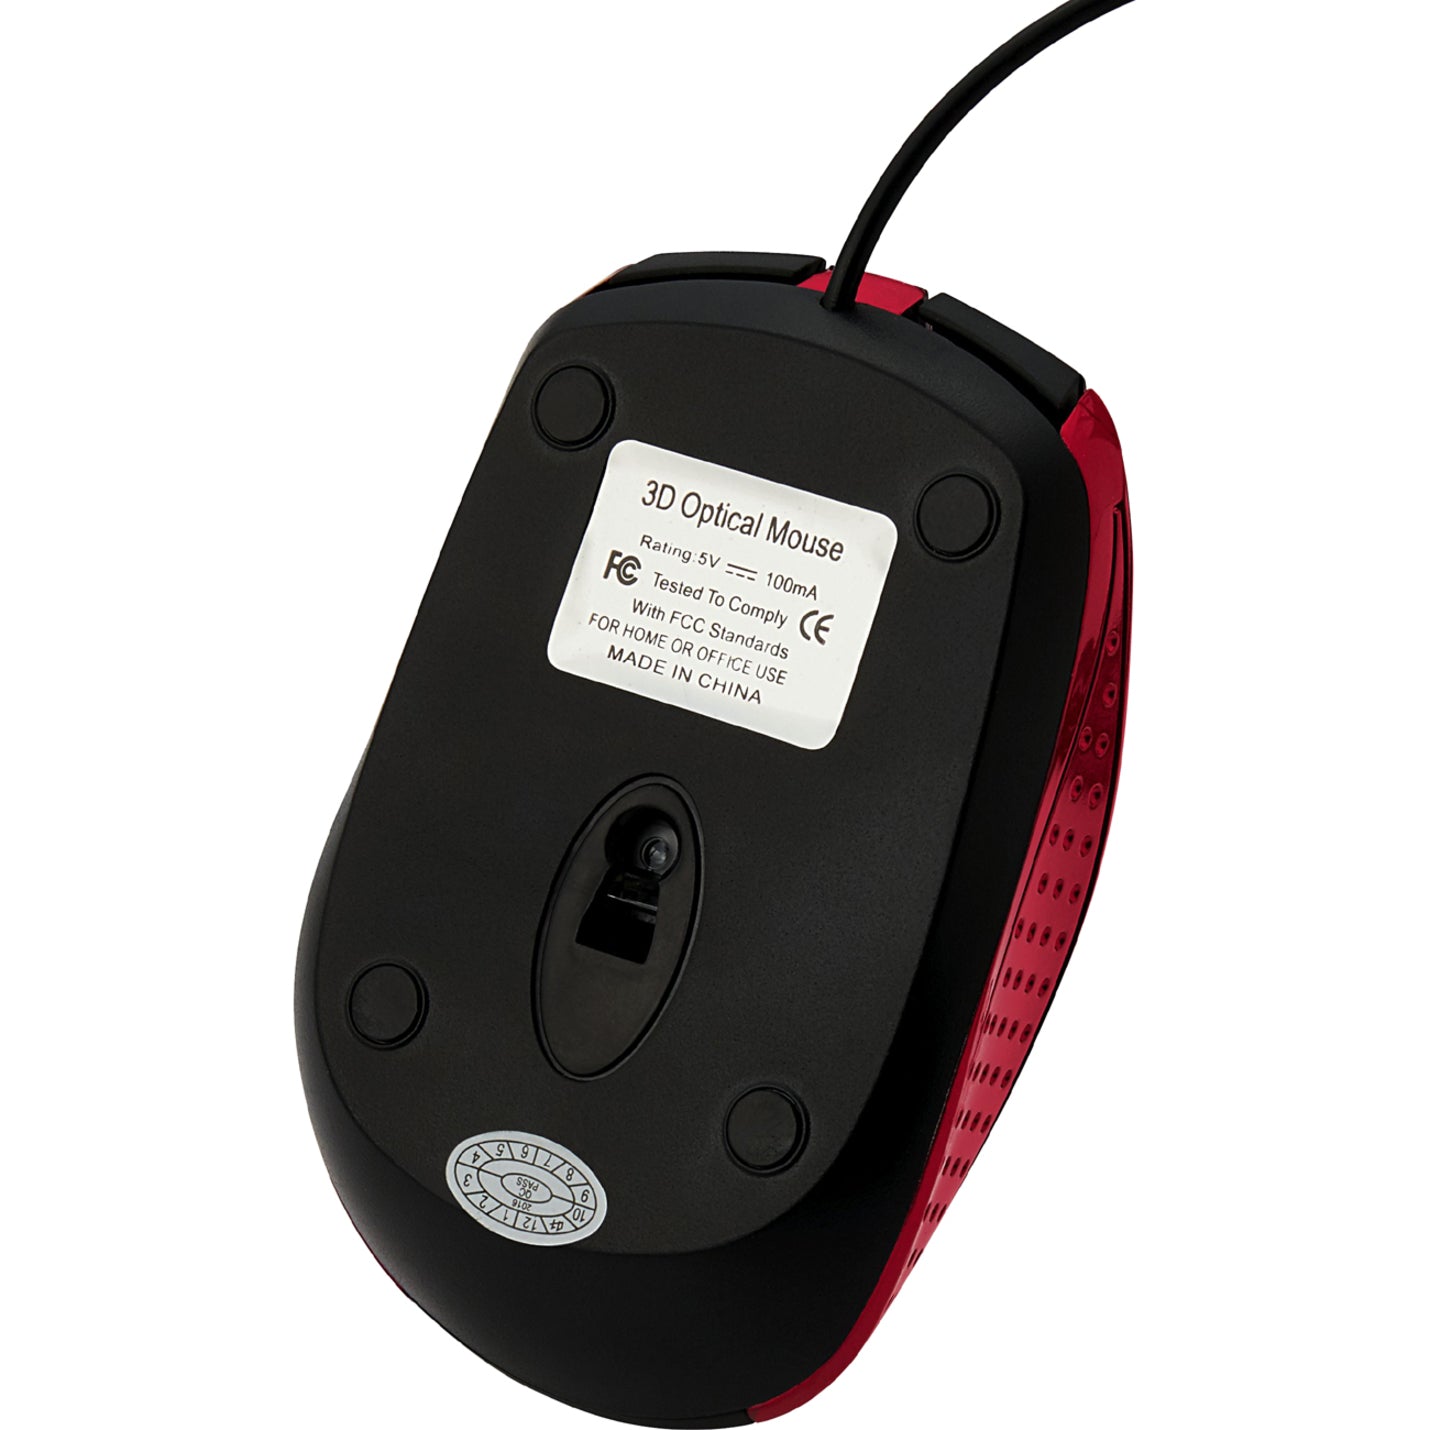 Verbatim 99742 Corded Notebook Optical Mouse - Red/Black, USB Type A